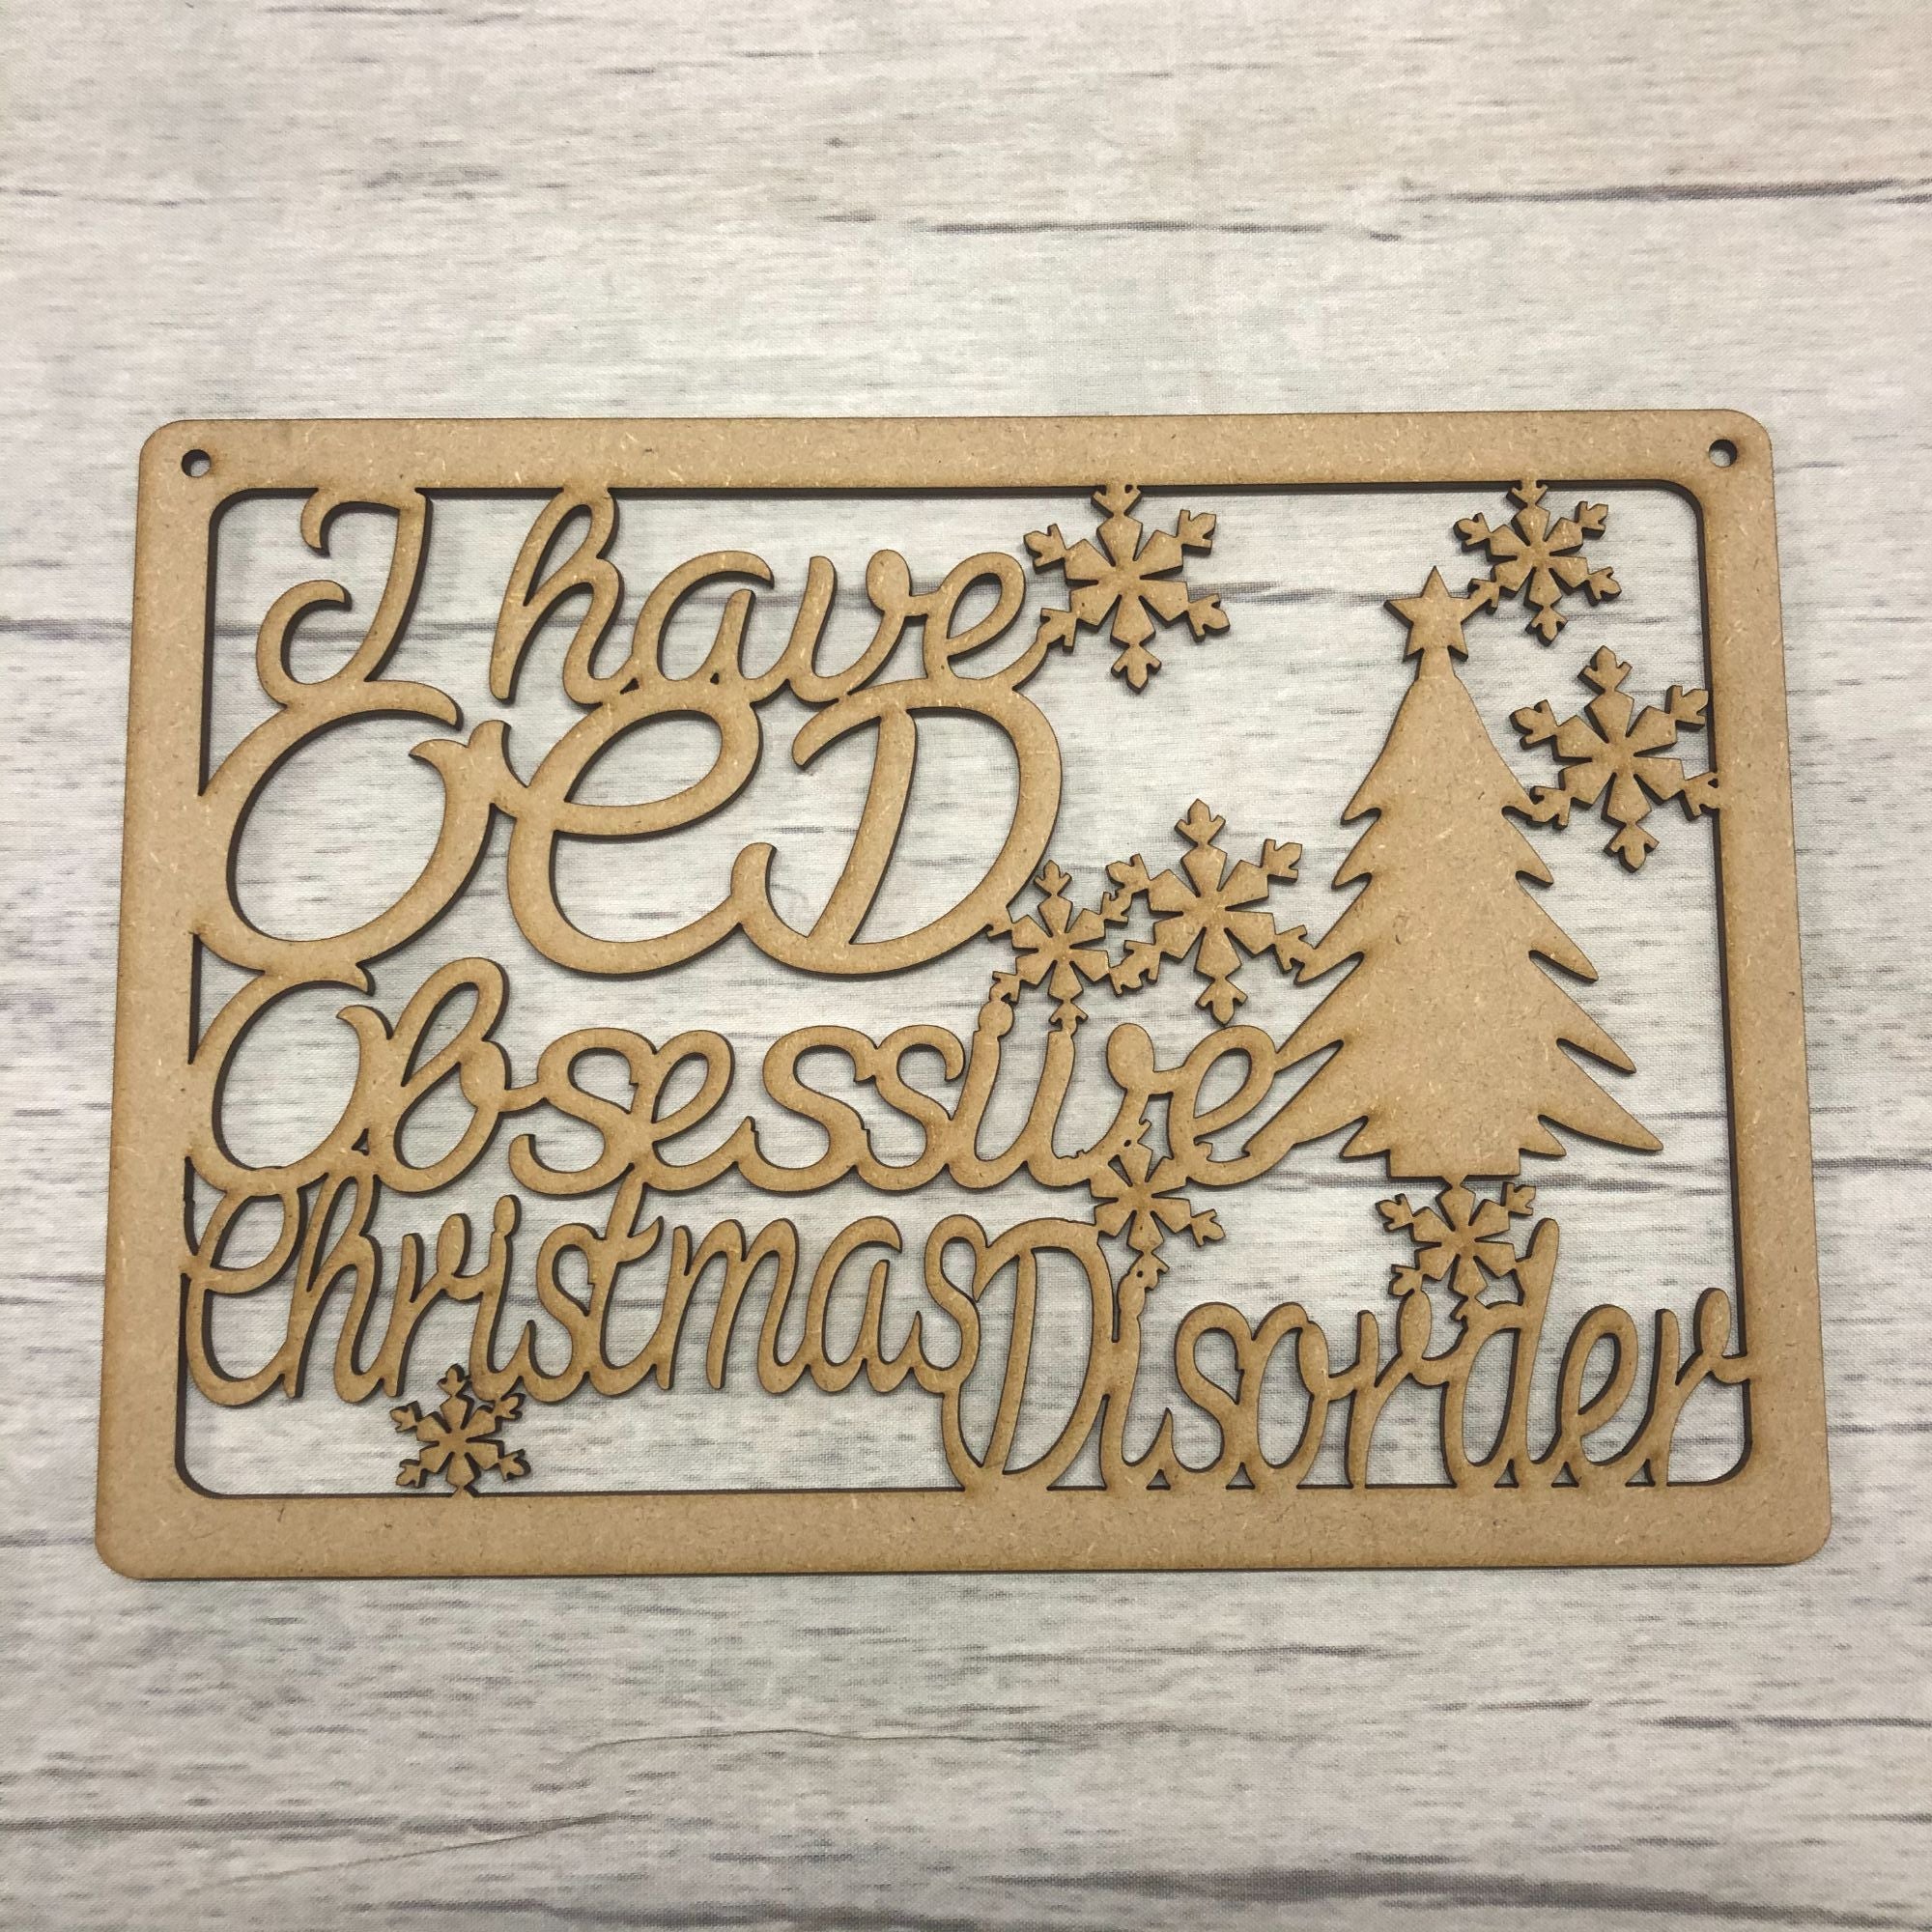 Obsessive Christmas Disorder' - Hanging plaque